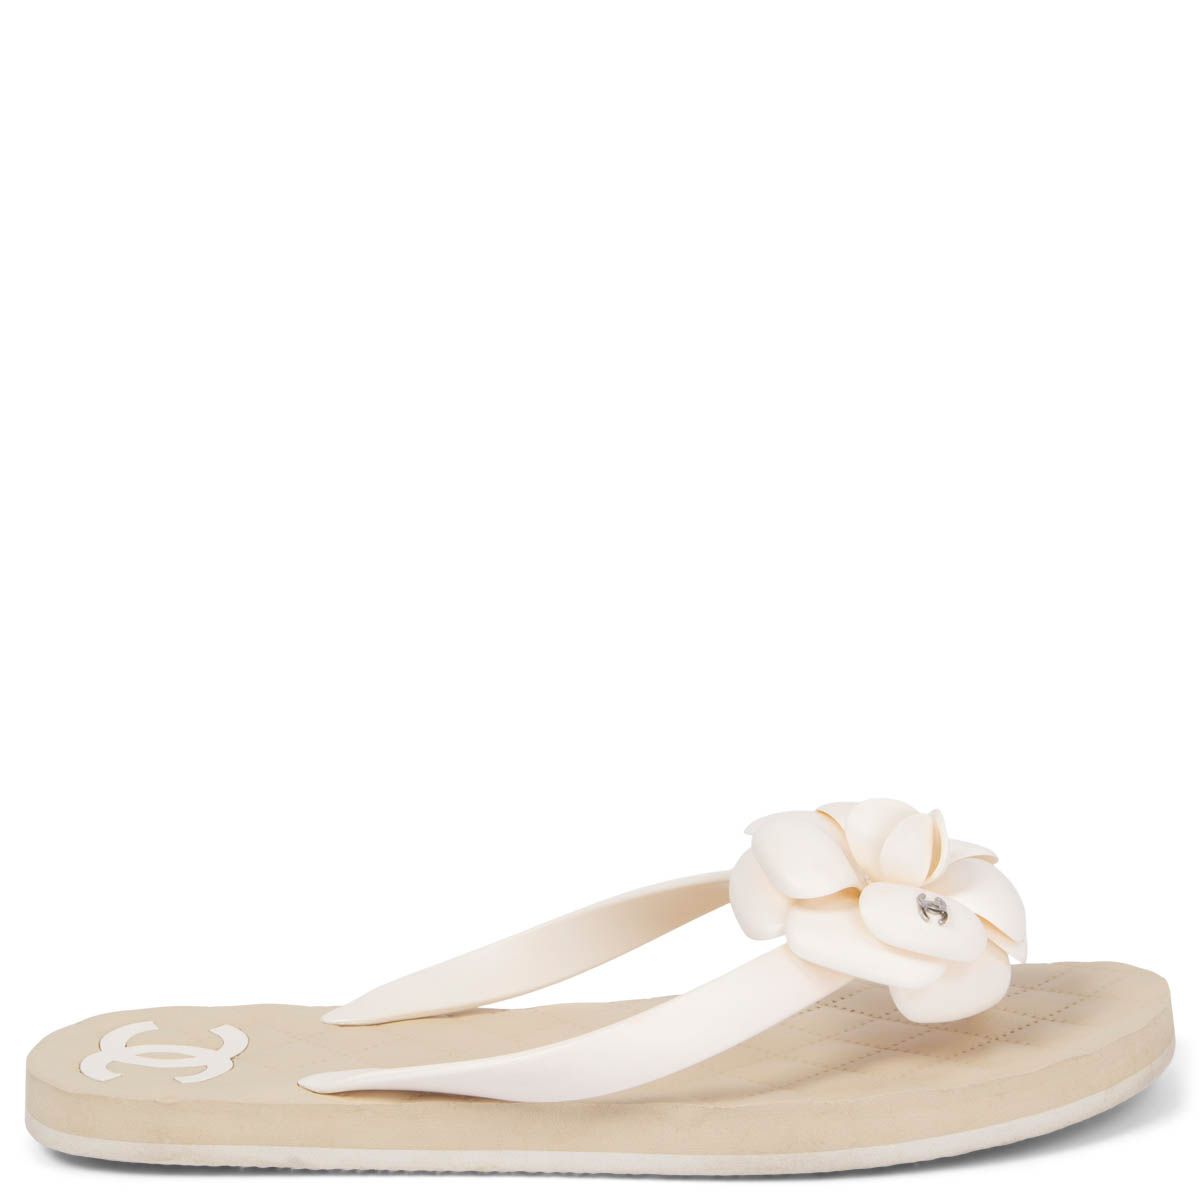 Chanel Camellia Rubber Thong Sandals Ivory Sand 38